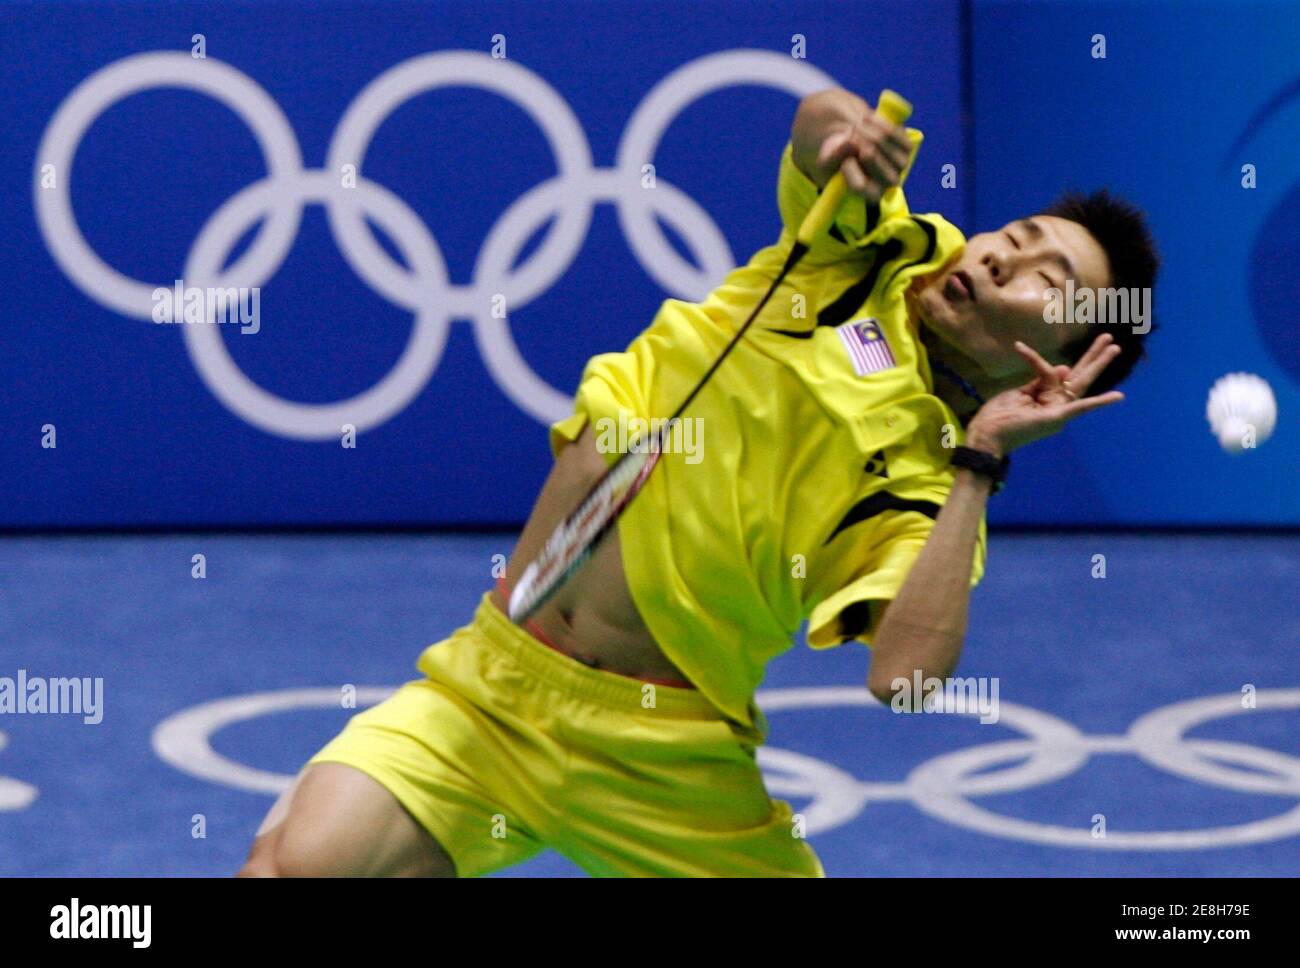 Lee Chong Wei of Malaysia returns a shot during his men's singles semifinal badminton match against Lee Hyunil of South Korea at the Beijing 2008 Olympic Games, August 15, 2008.     REUTERS/Beawiharta (CHINA) Stock Photo